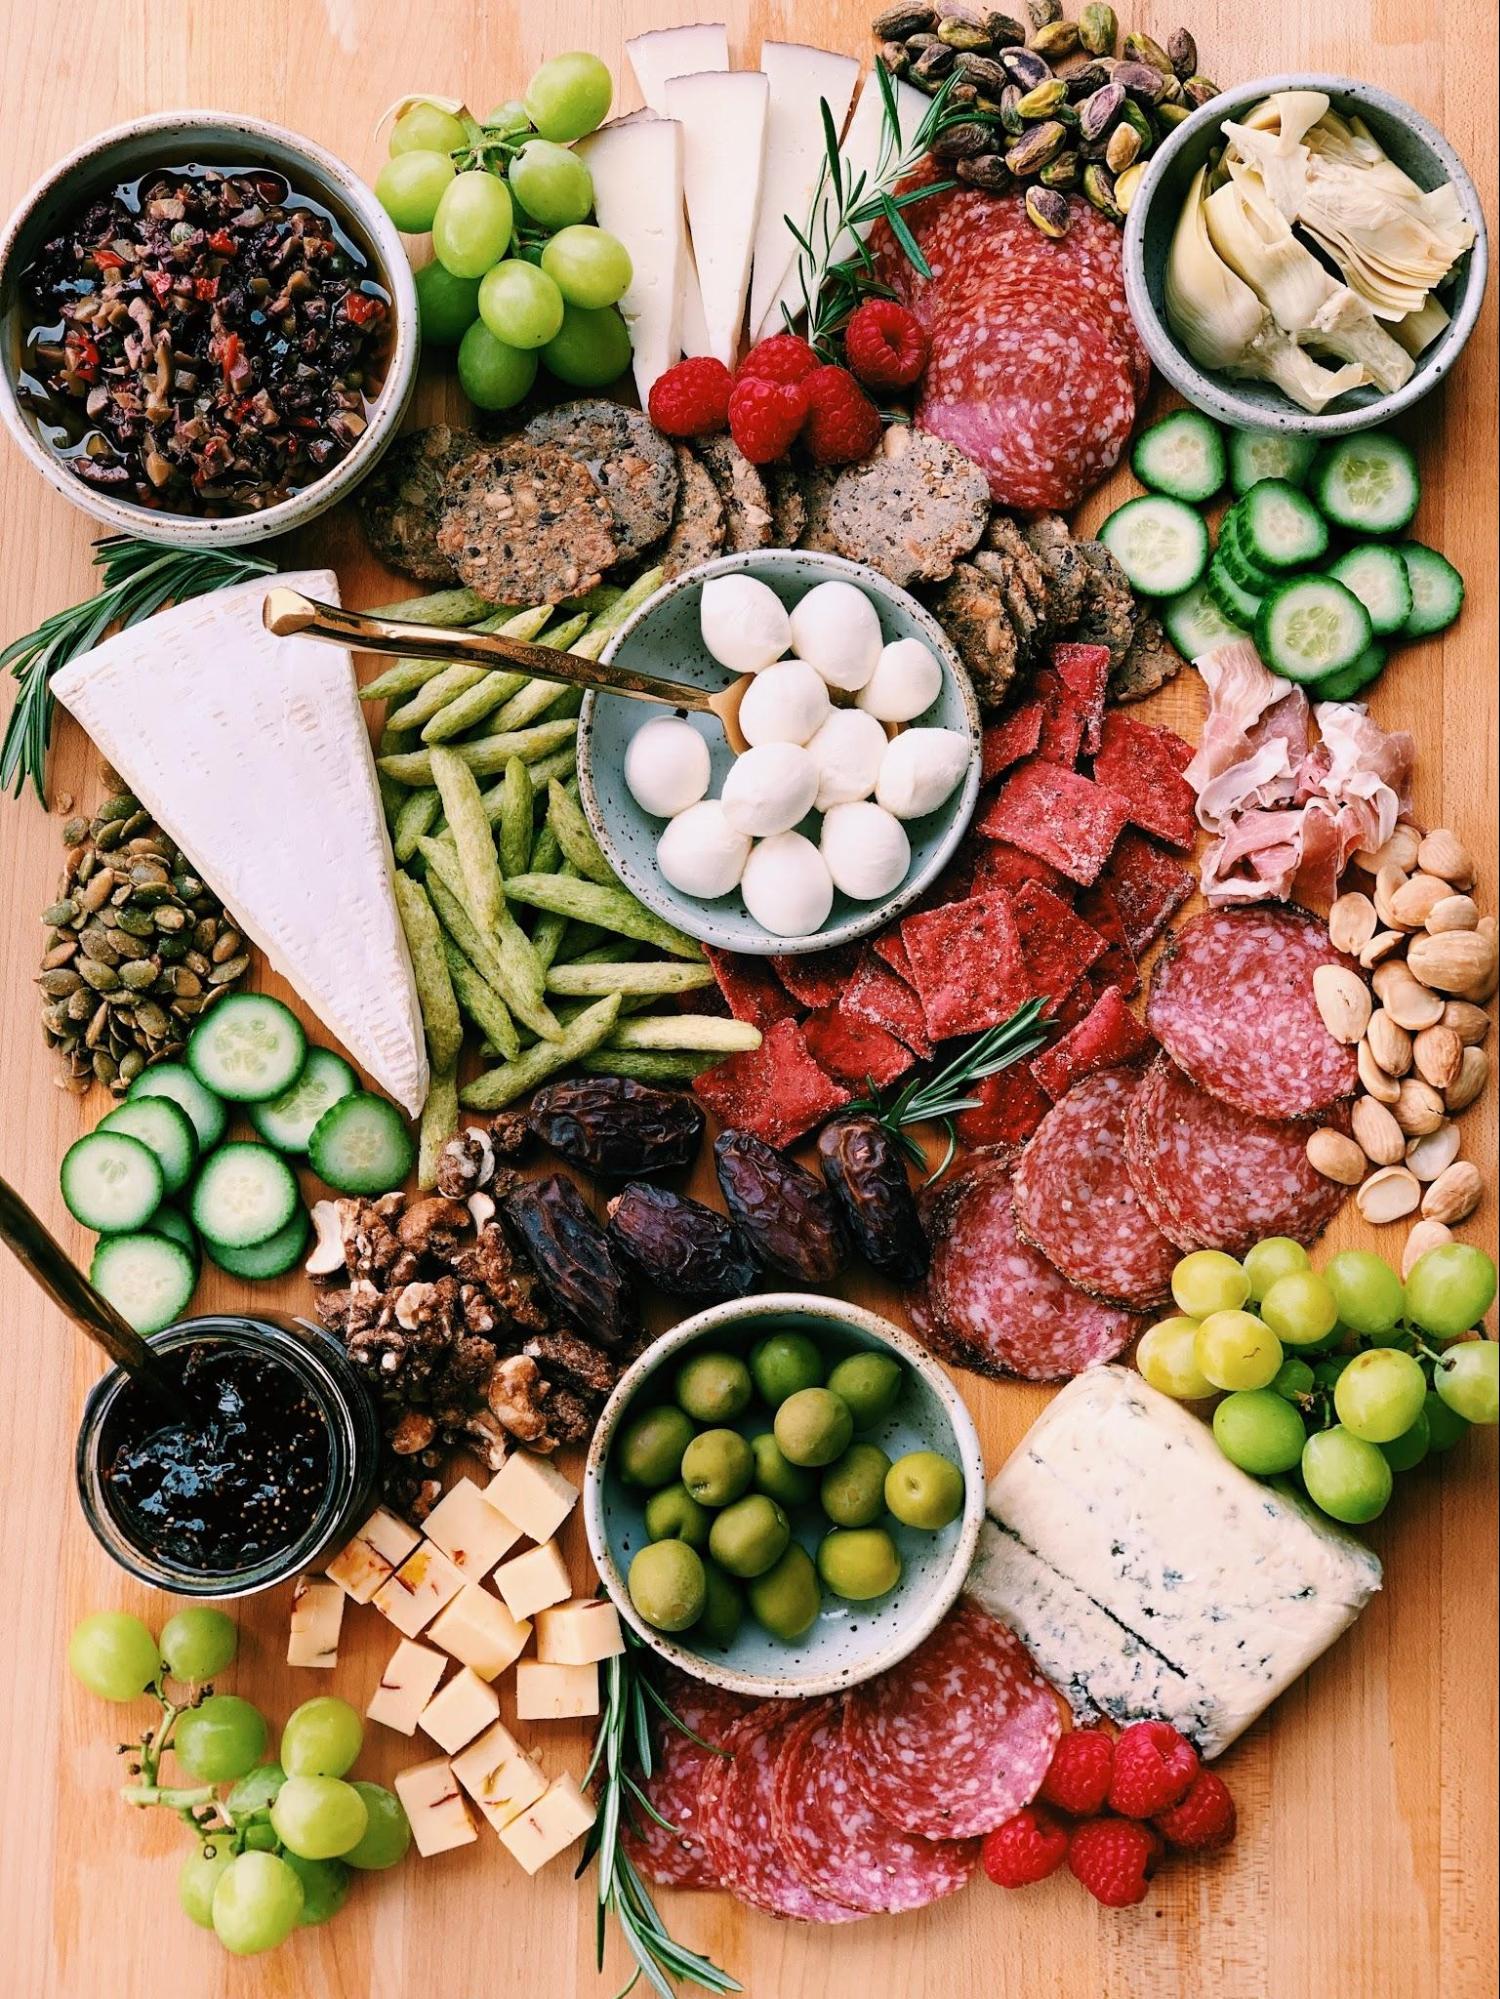 How To Build A Charcuterie Board - Melissa's Healthy Kitchen